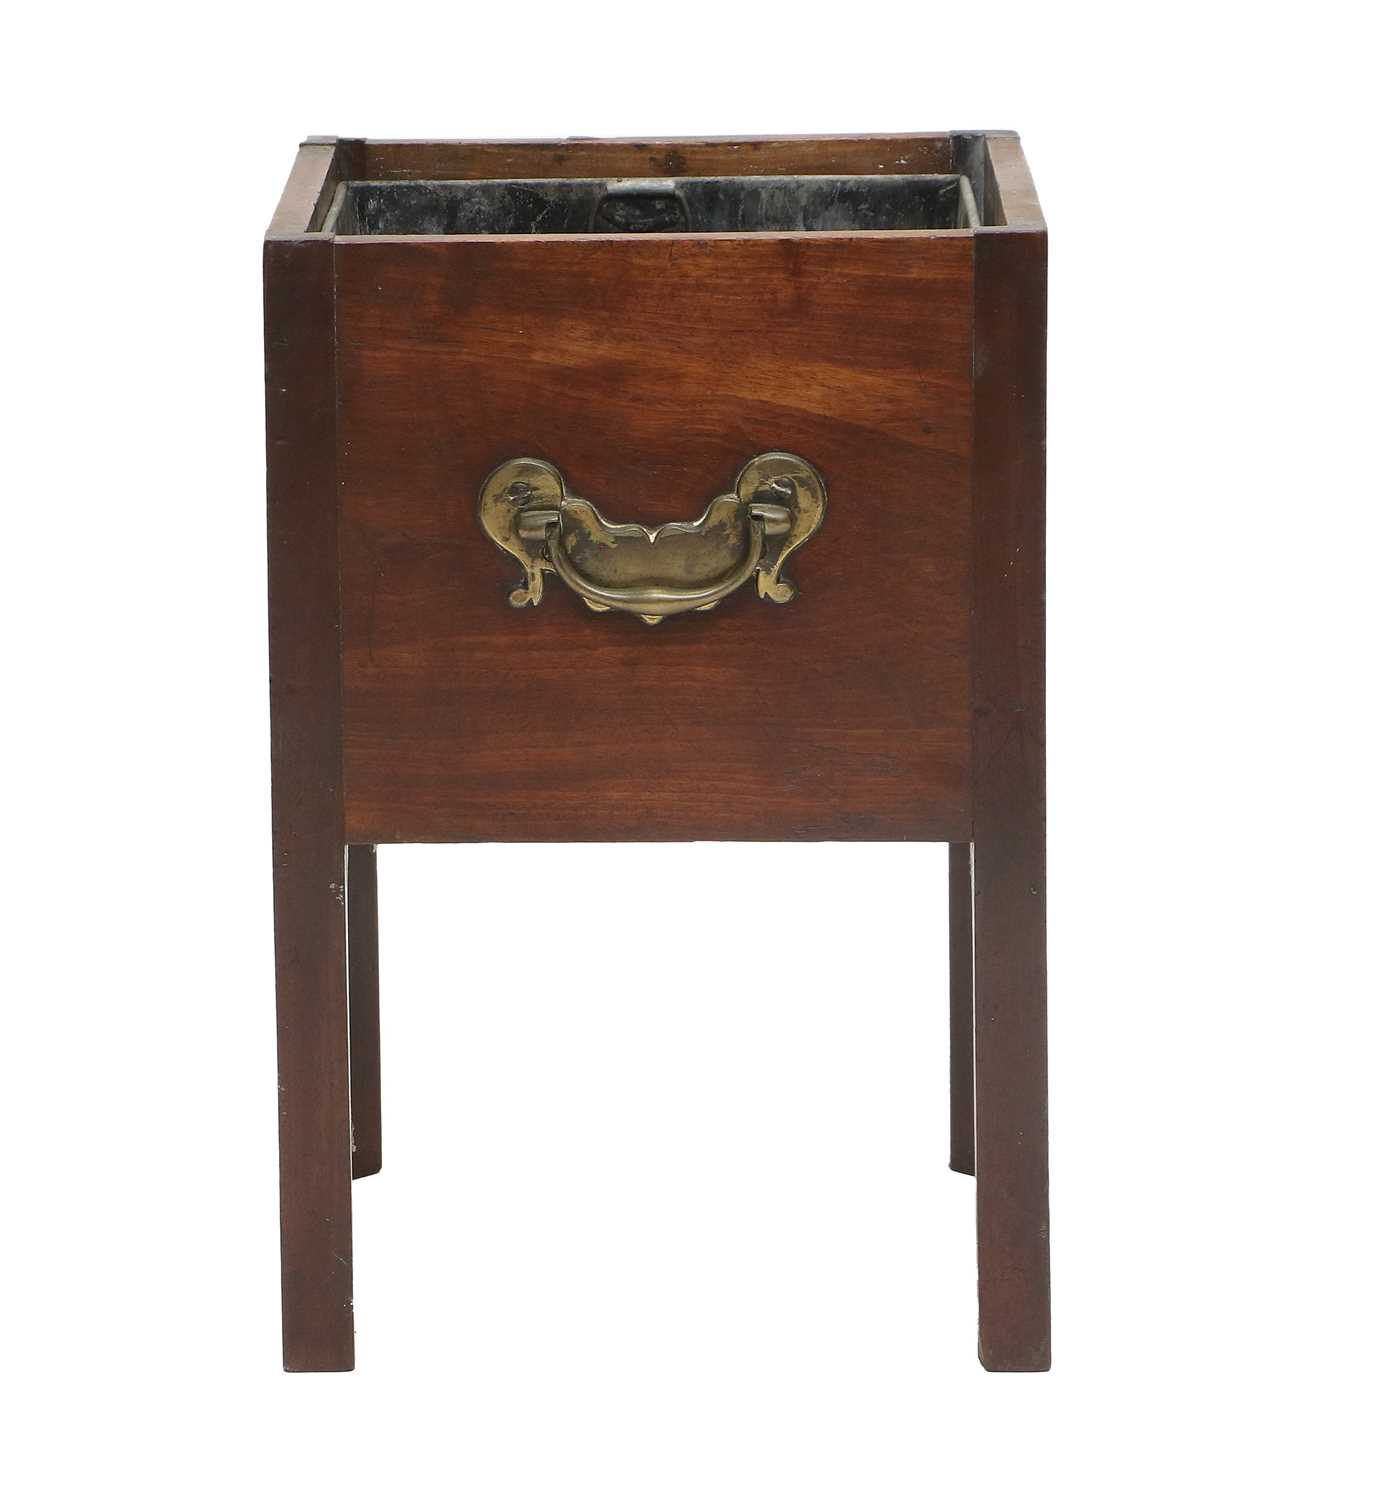 A George III Mahogany Planter, late 18th century, of octagonal-shaped form with brass carrying - Image 6 of 8